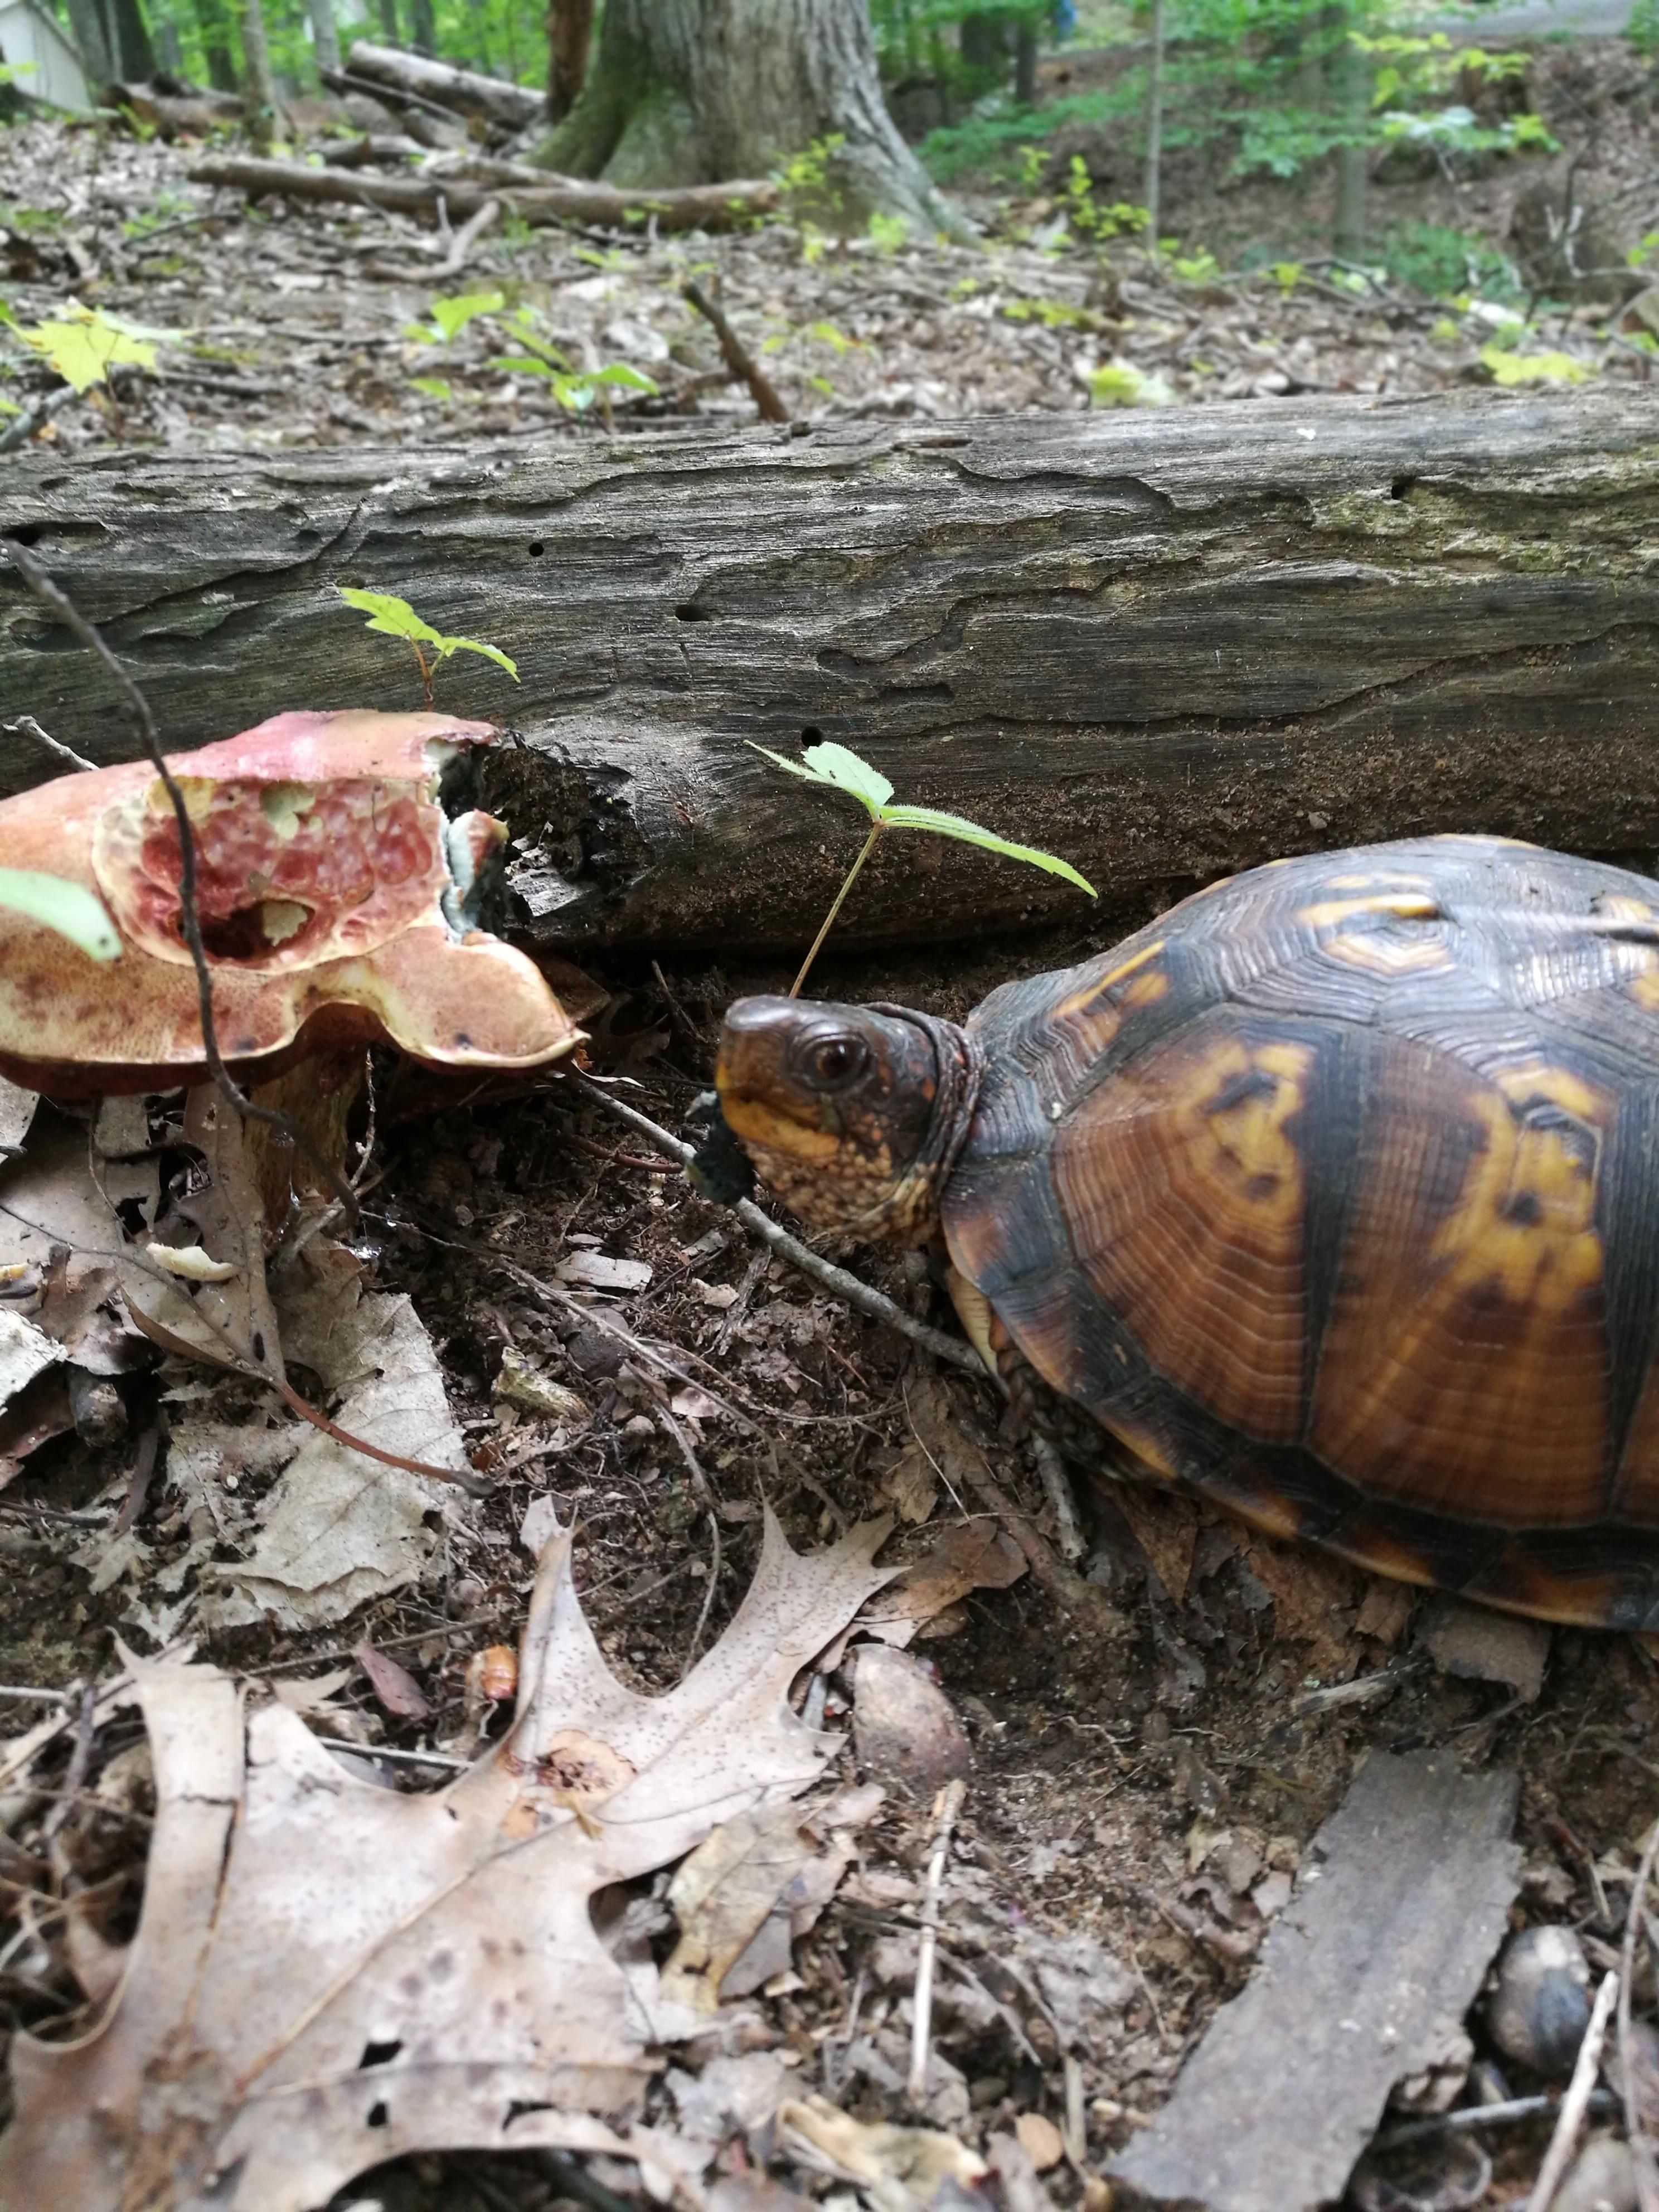 This turtle is implying I'm not cool enough to eat with him. He doesn't want to say it, but he's definitely hinting.